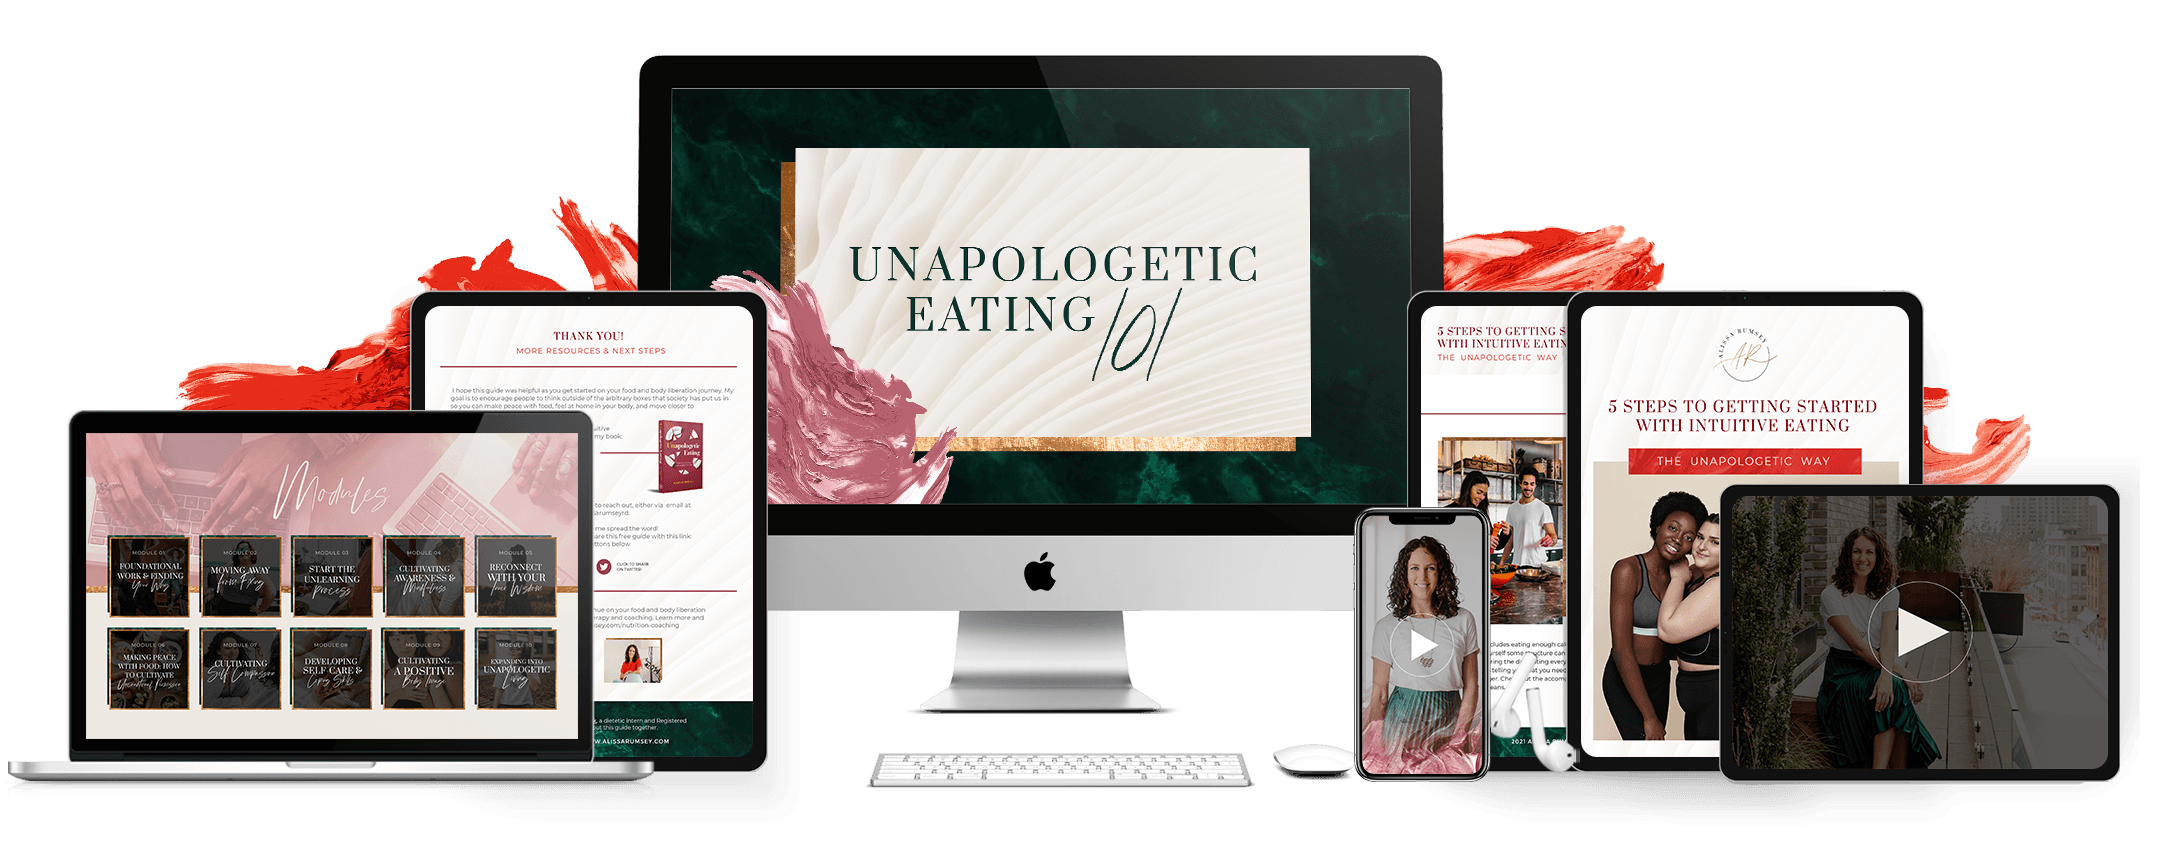 online intuitive eating course - Unapologetic Eating 101